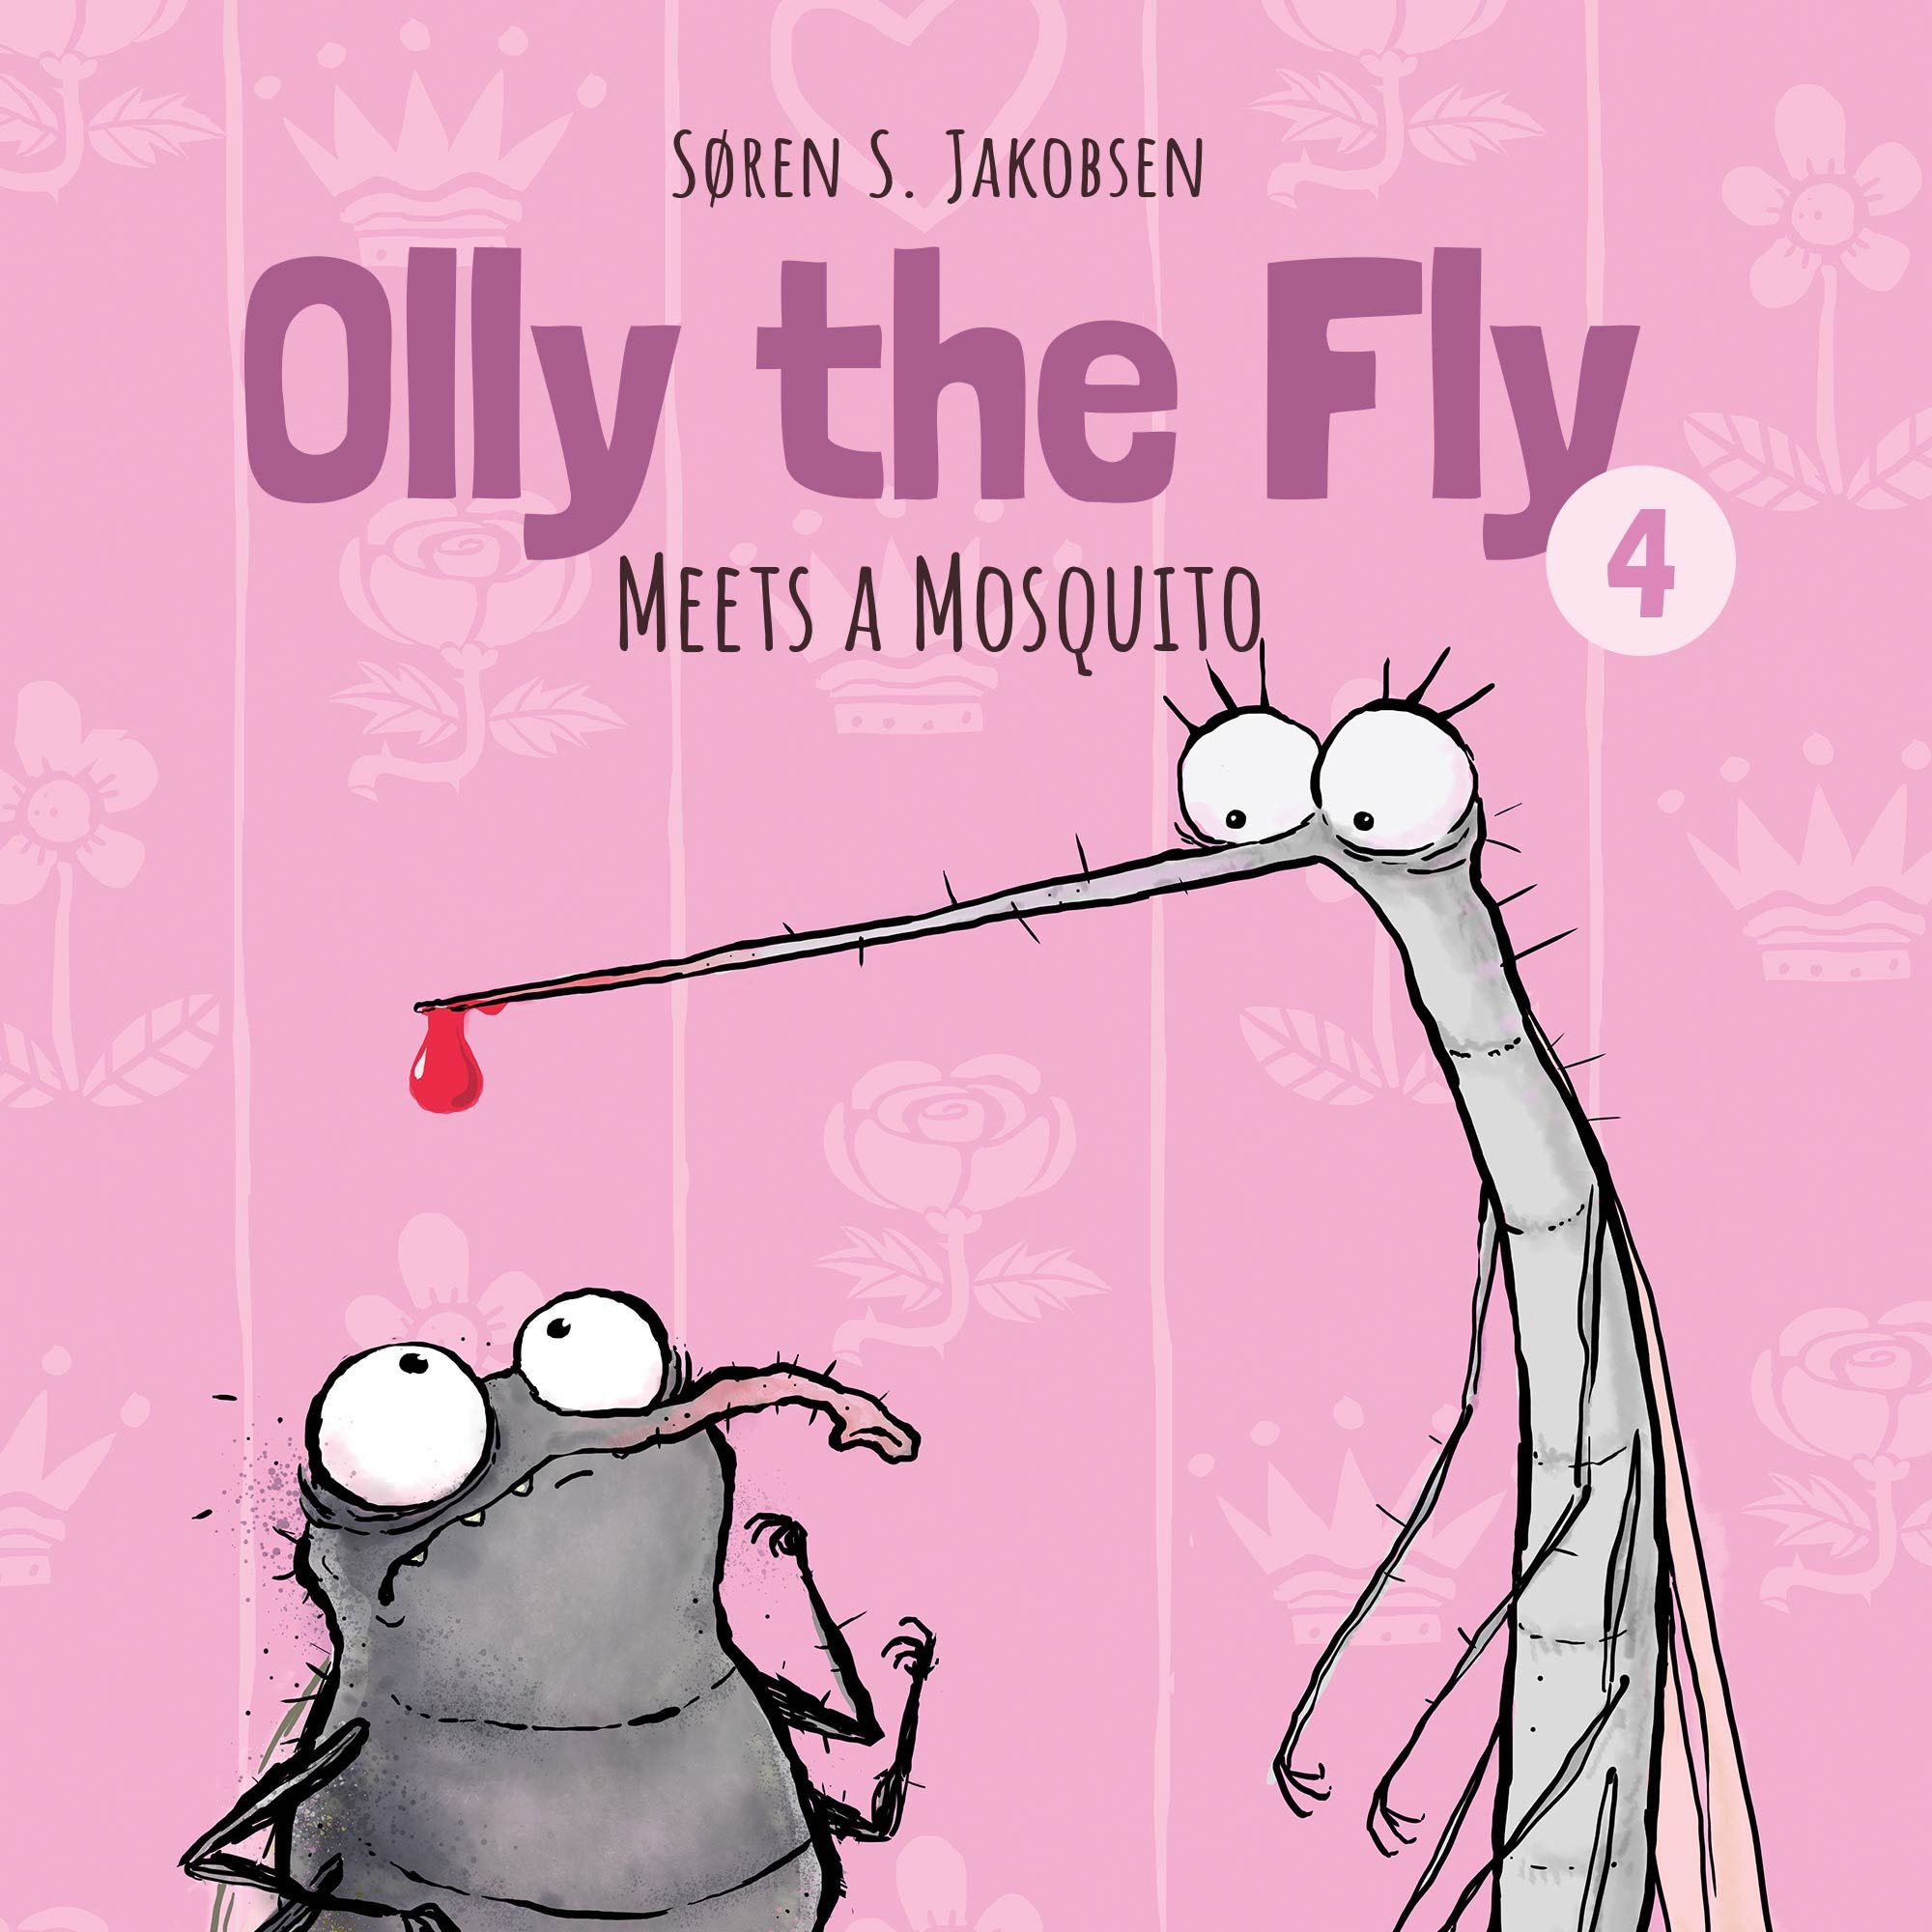 Olly the Fly #4: Olly the Fly Meets a Mosquito, lydbog af Søren S. Jakobsen